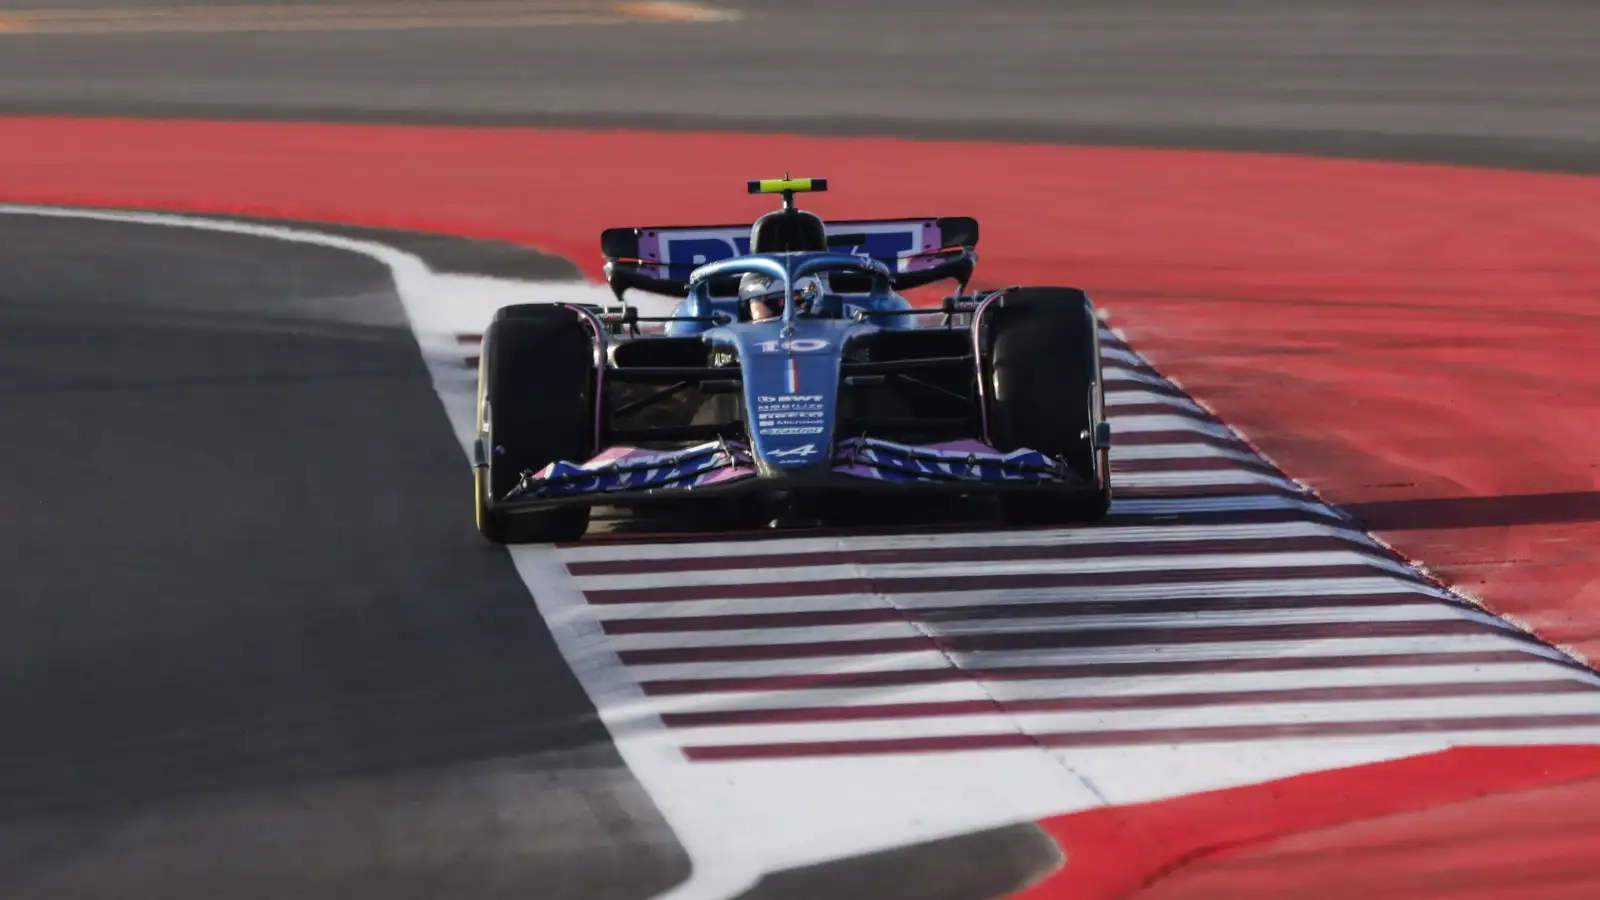 Alpine driver Pierre Gasly running wide on the revised track limits at Lusail.